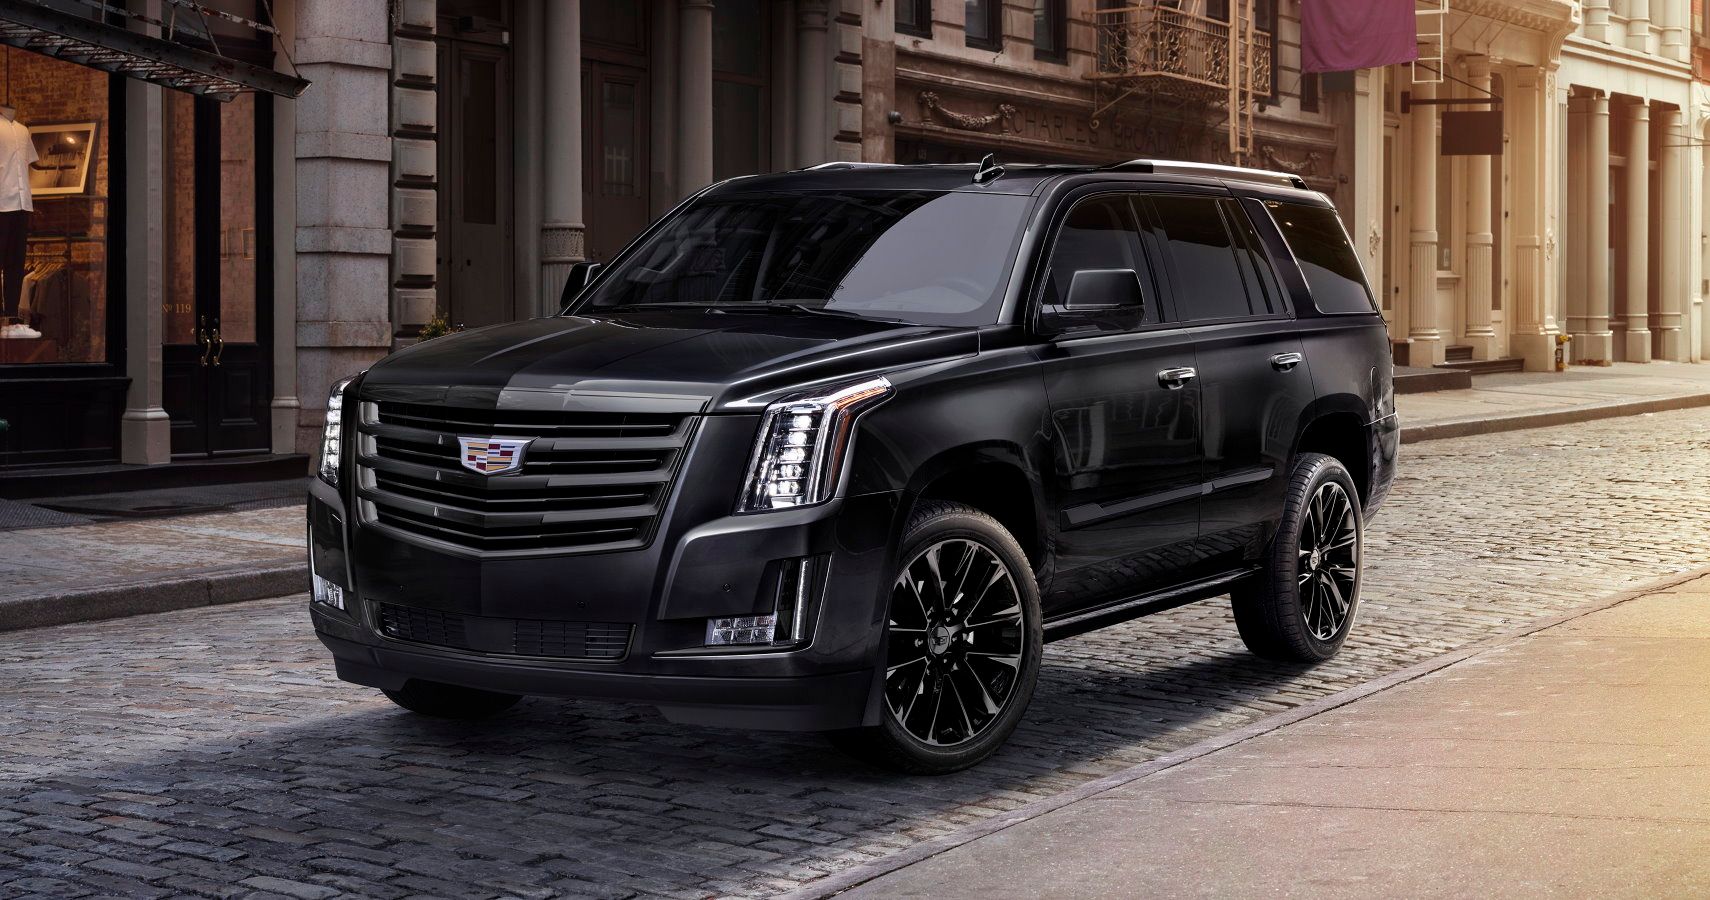 The Escalade Sport Edition is a bold new look for those who aren???t afraid of the dark. It will be available for orders beginning in Q1 of 2019 with a starting MSRP in the U.S.A. of $84,790 including destination charge. For more information, please visit Cadillac.com.